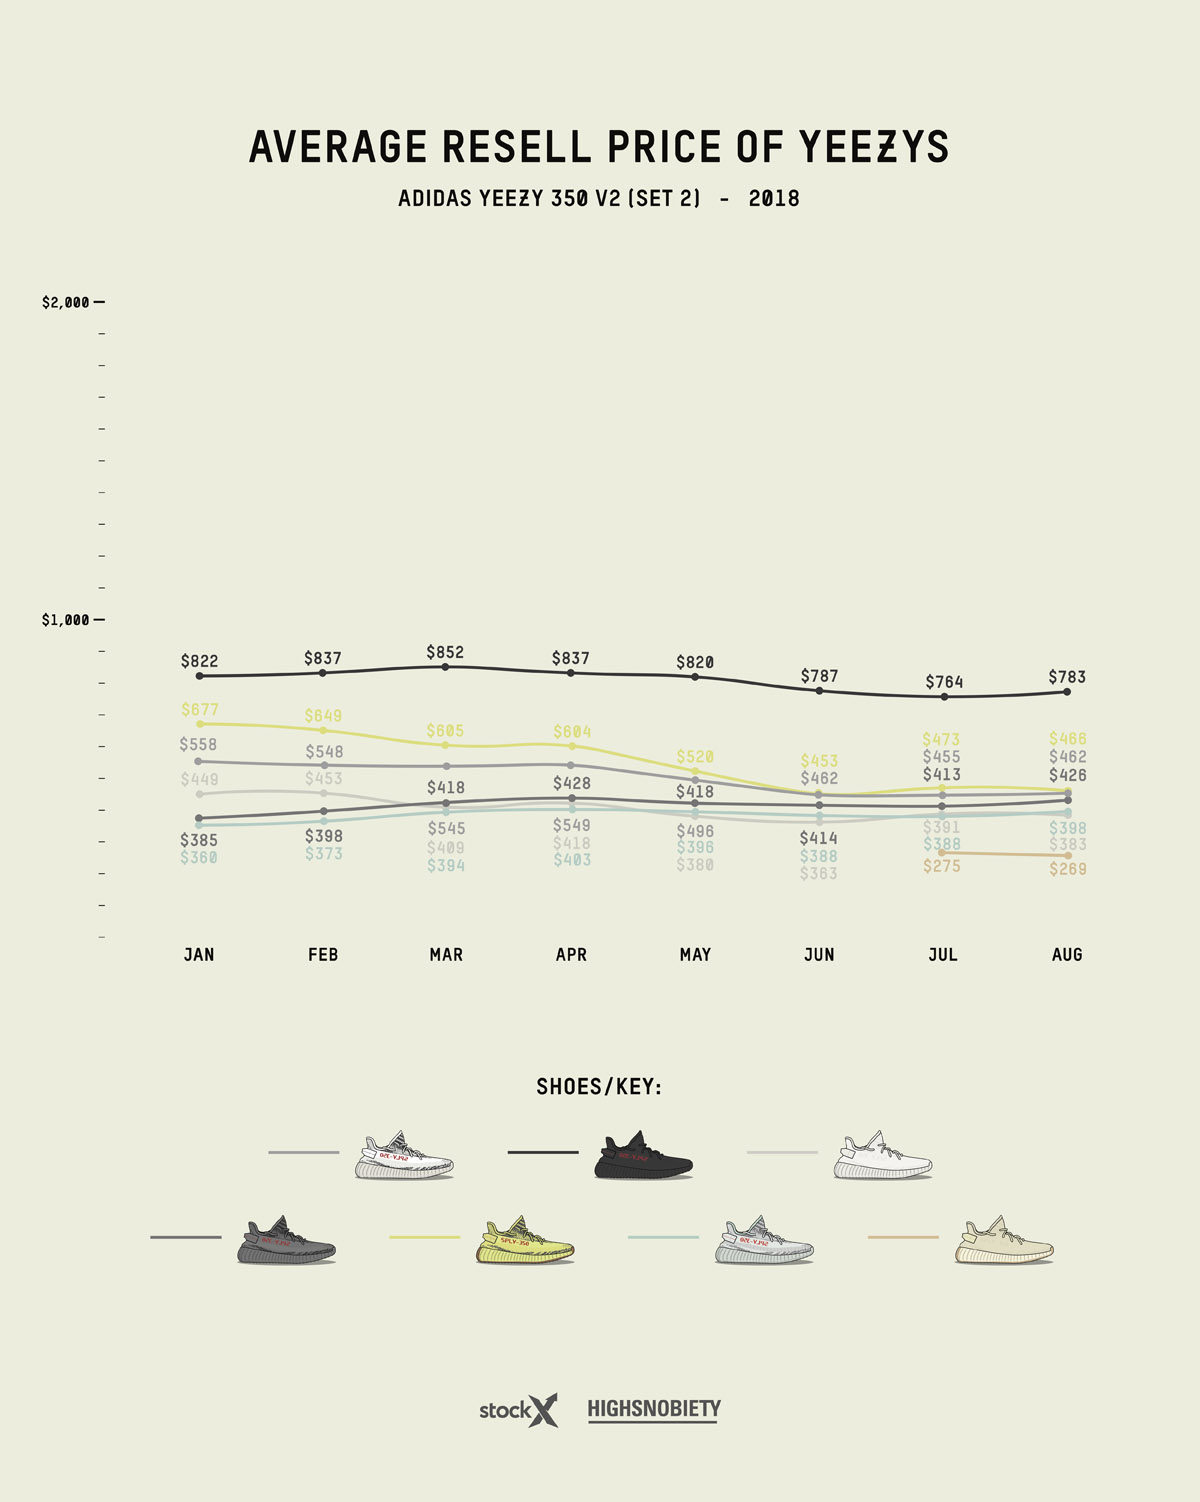 adidas YEEZY Resell Price Guide: 2016 to 2018